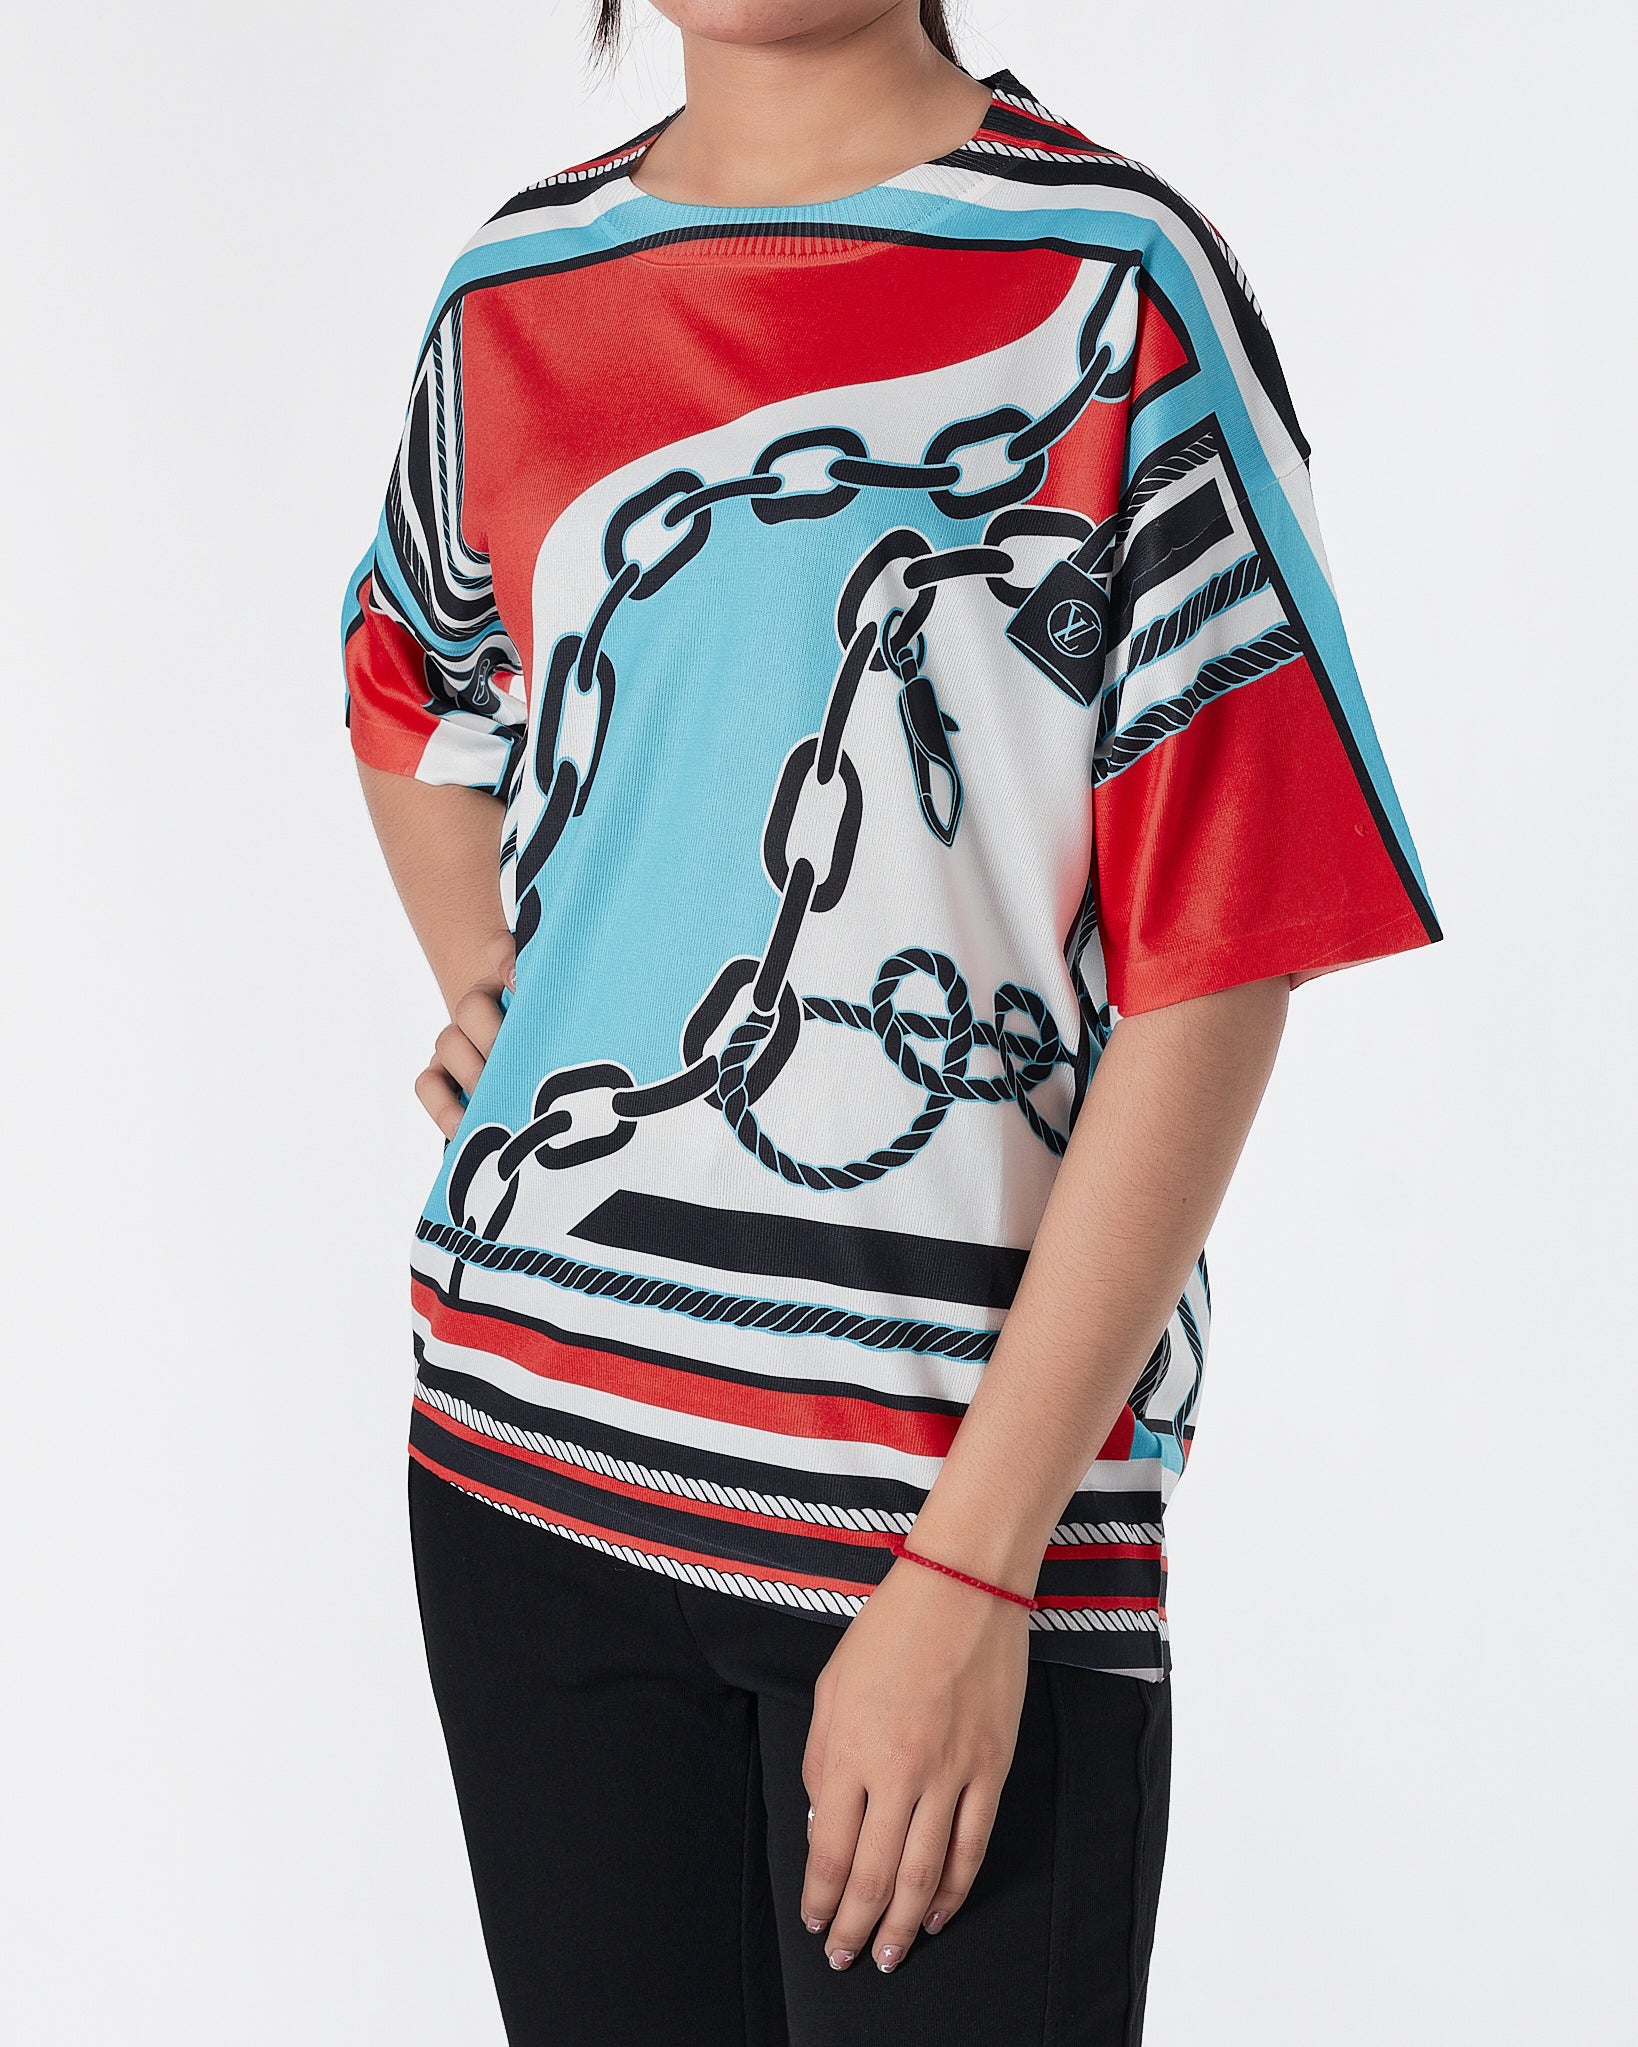 Chain Over Printed Lady Shirt 15.90